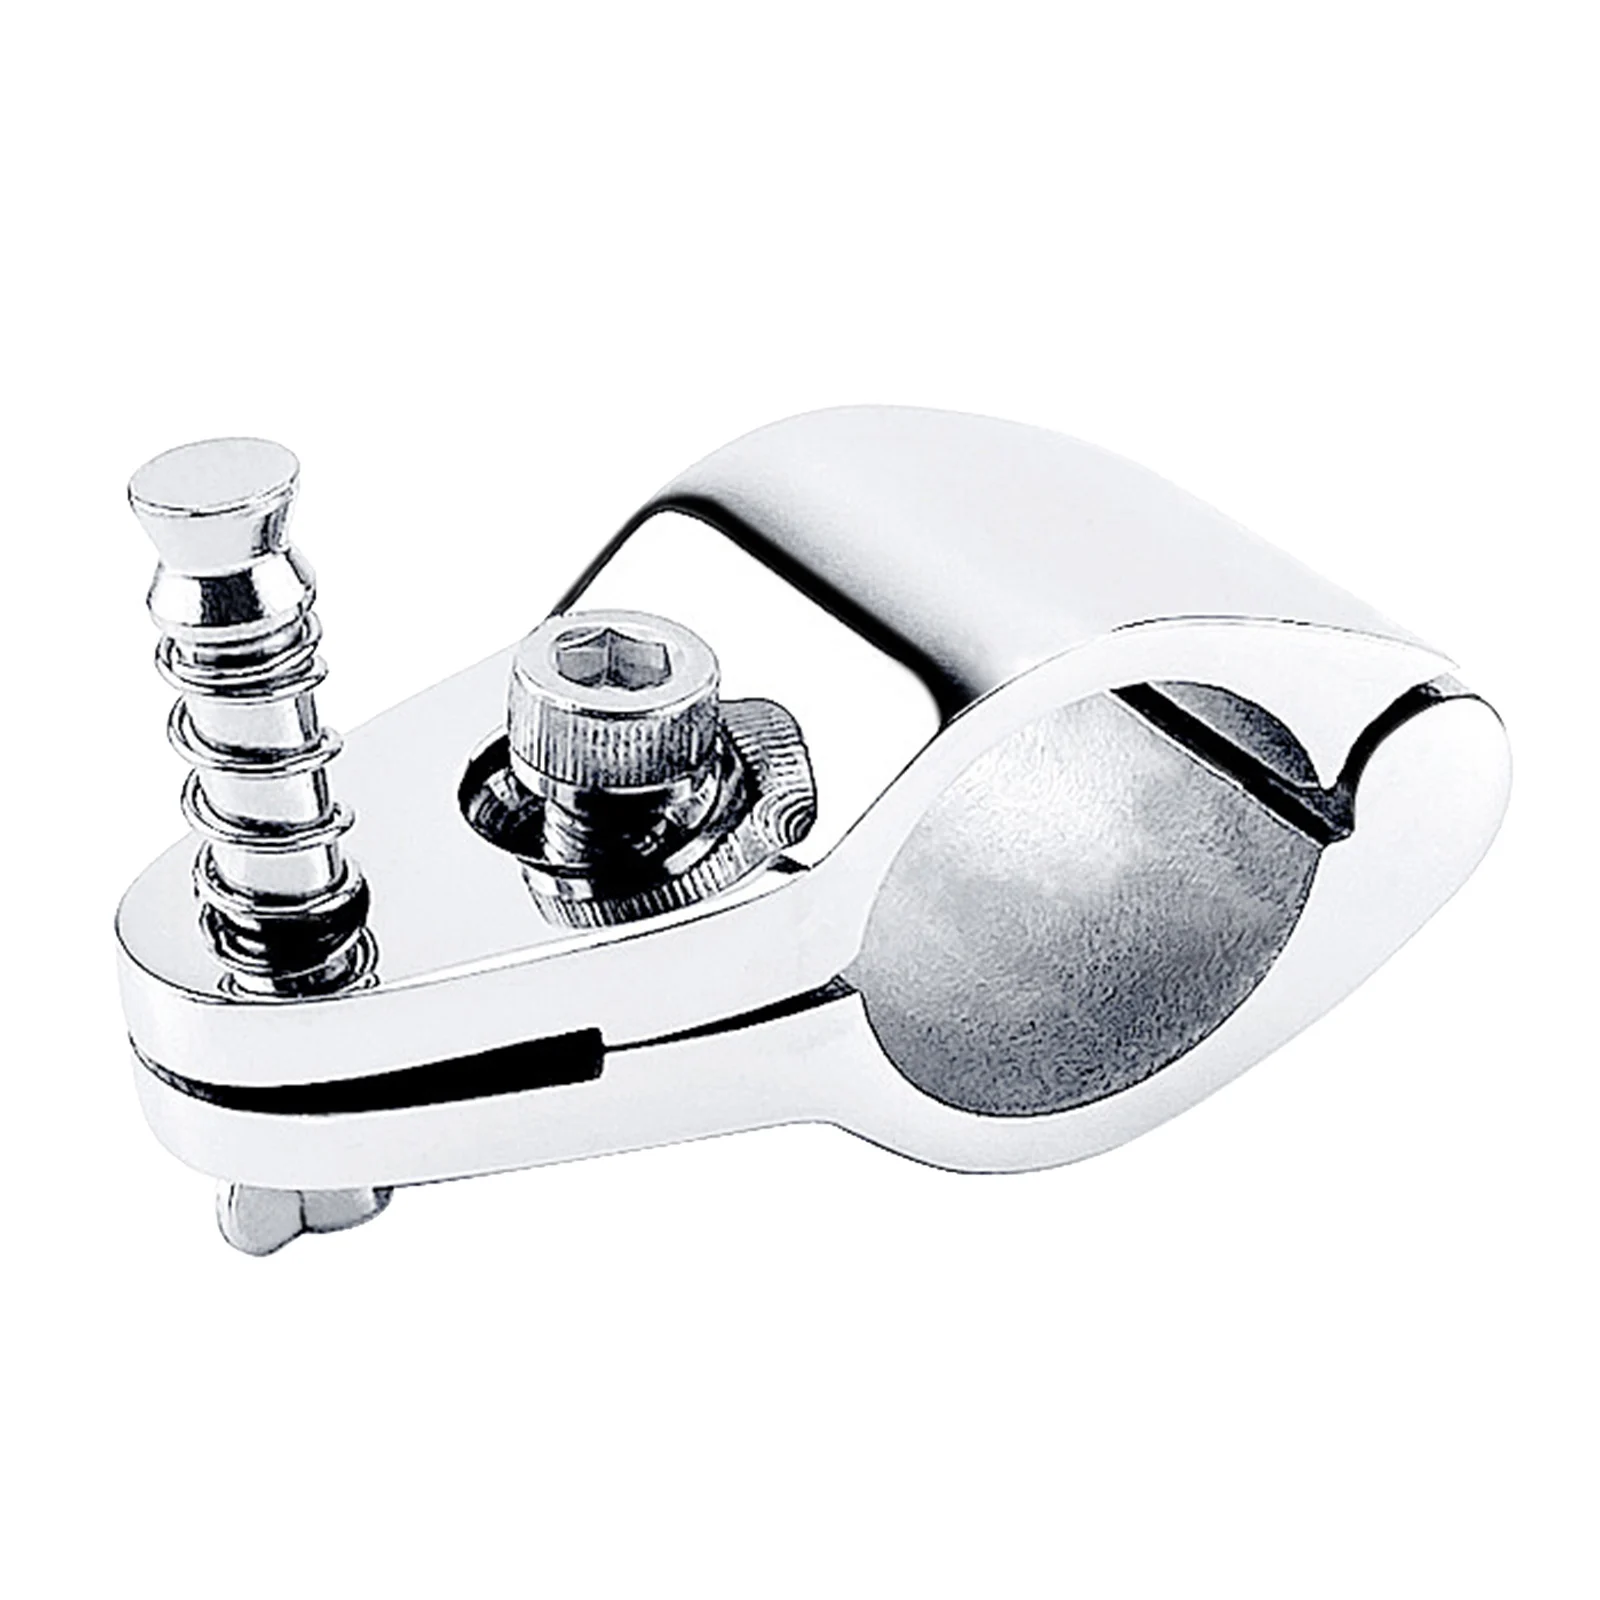 

316 Stainless Steel Marine Boat Bimini Top Hinged Jaw Slide Hinge 1" 25mm Hardware Heavy Duty with Pin & Cam Clamp